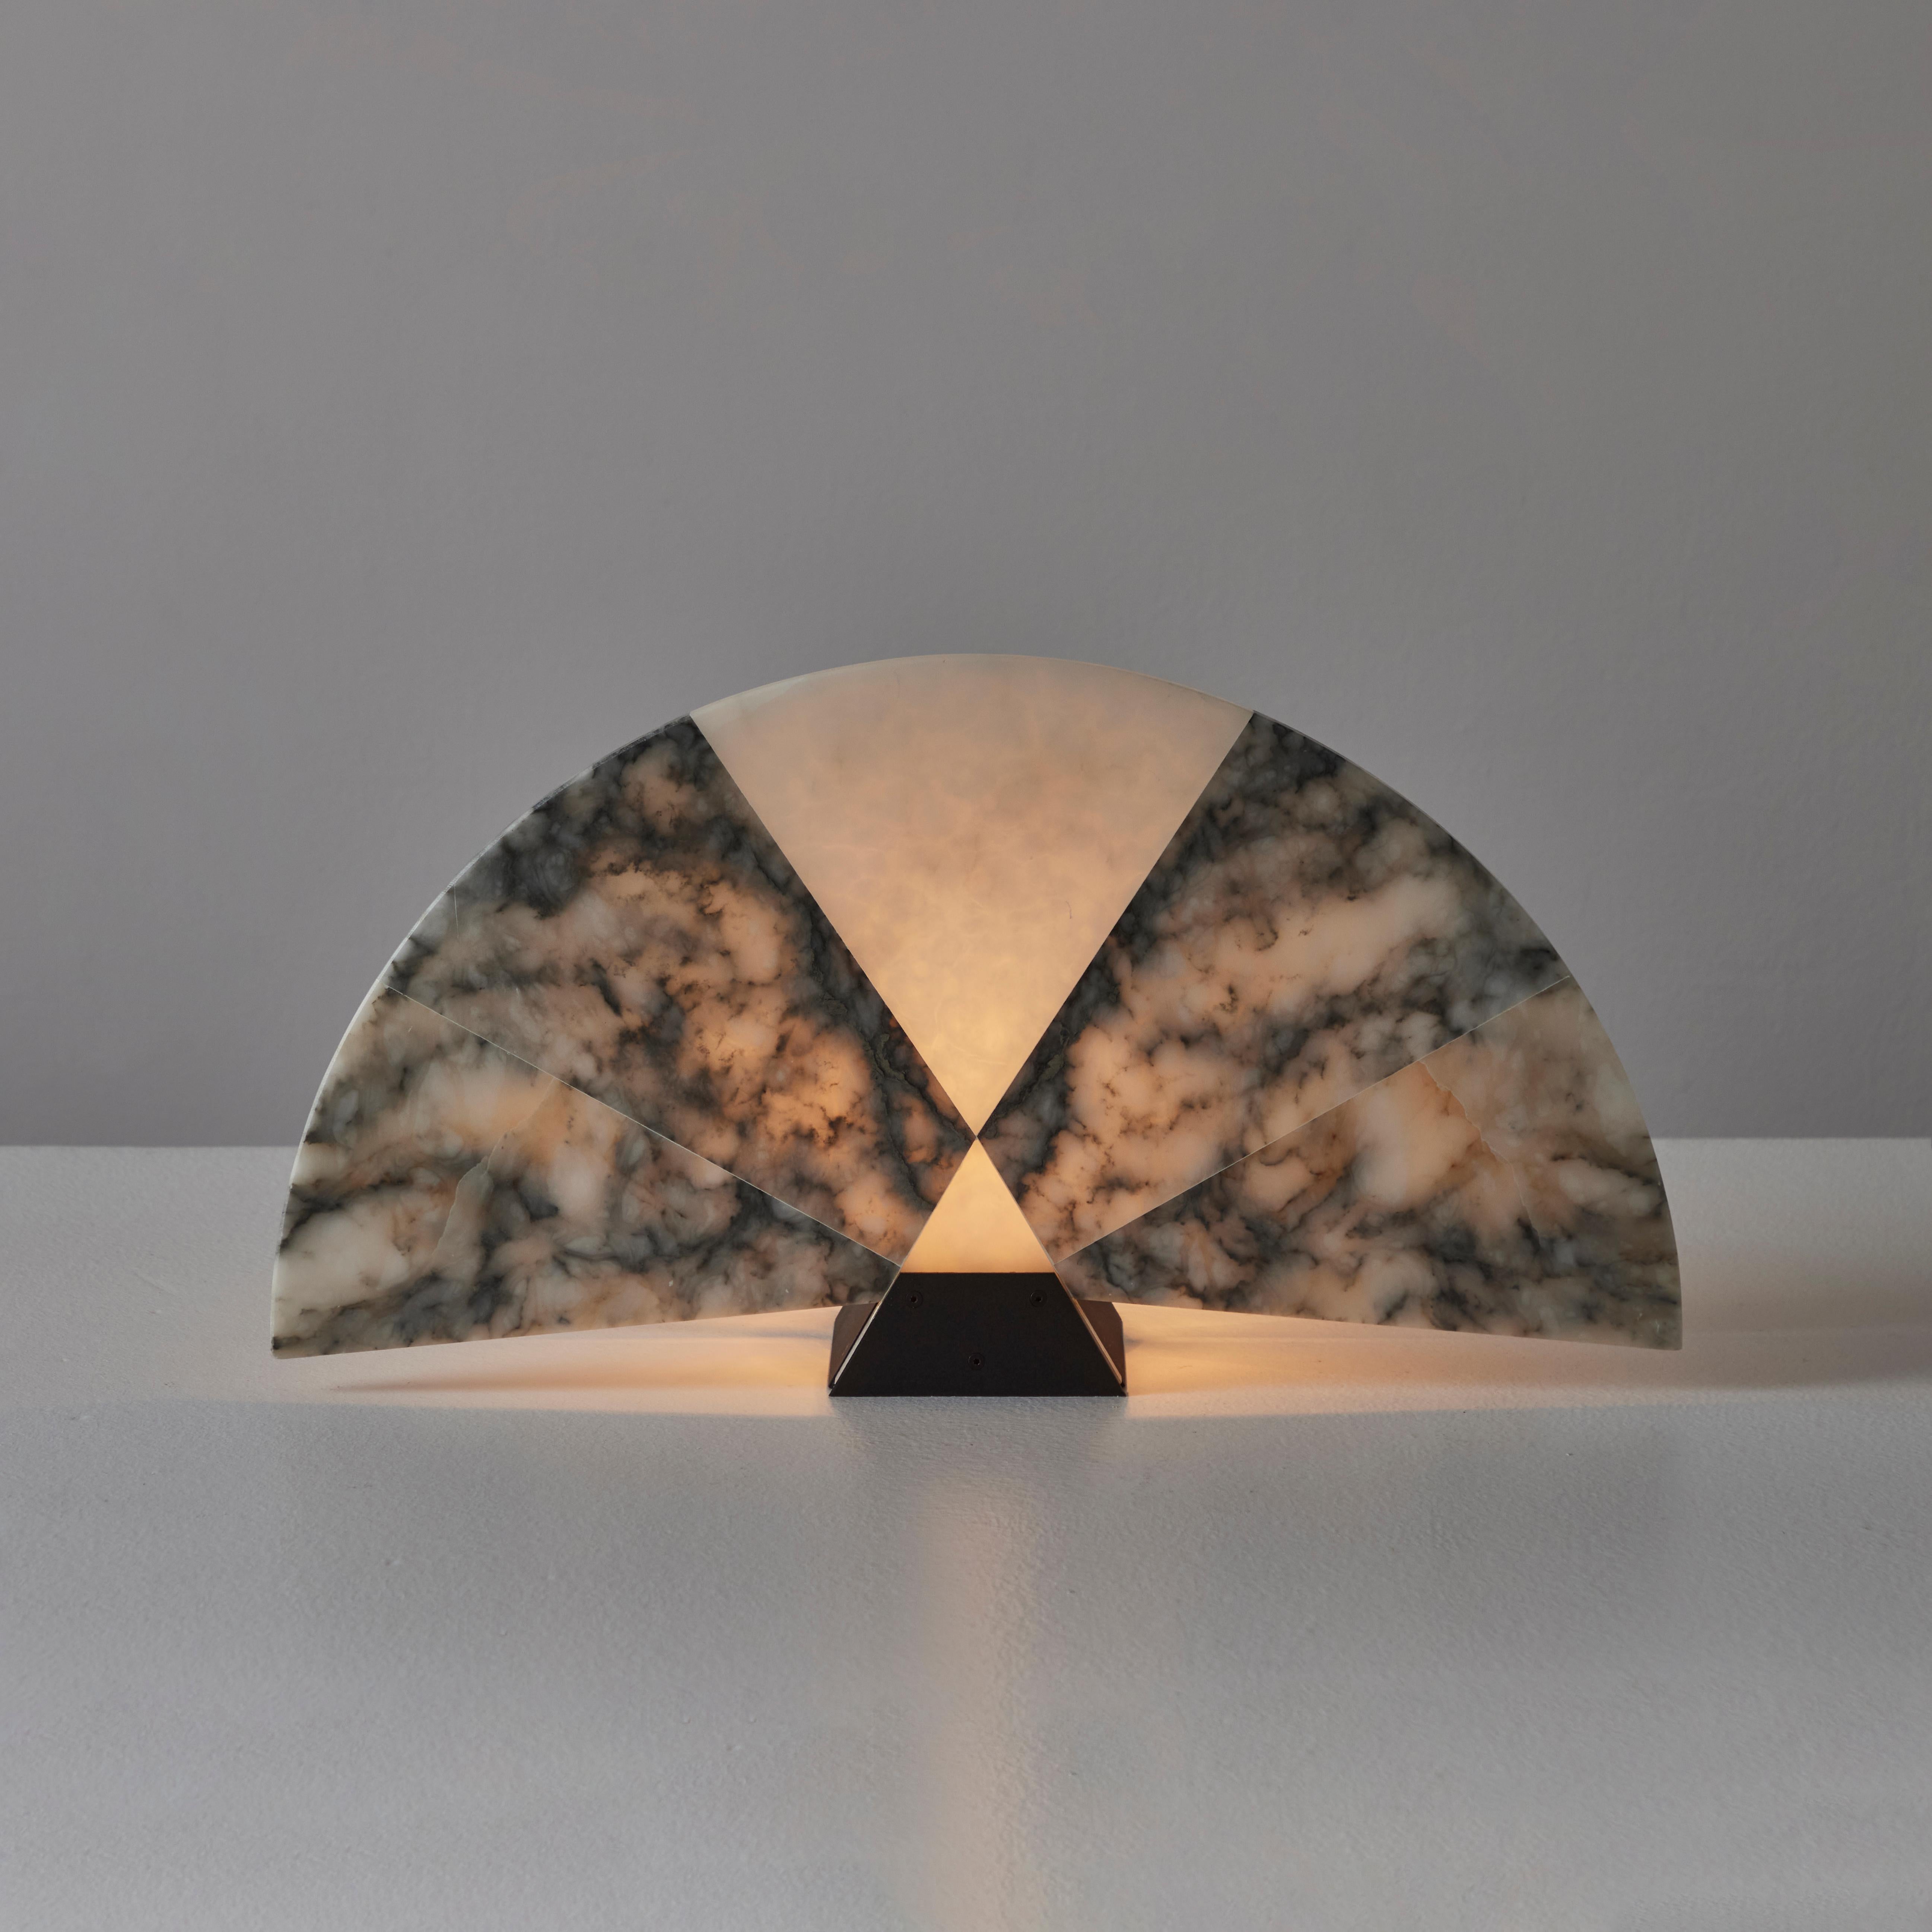 Model V584 'Ventaglio' Table Lamp by Angelo Mangiarotti for Skipper Pollux. Designed and manufactured in Italy, circa the 1980s. A multi-faceted marble fan is paired with a steel mounting bracket to form a stunning minimal table lamp. The lamp holds